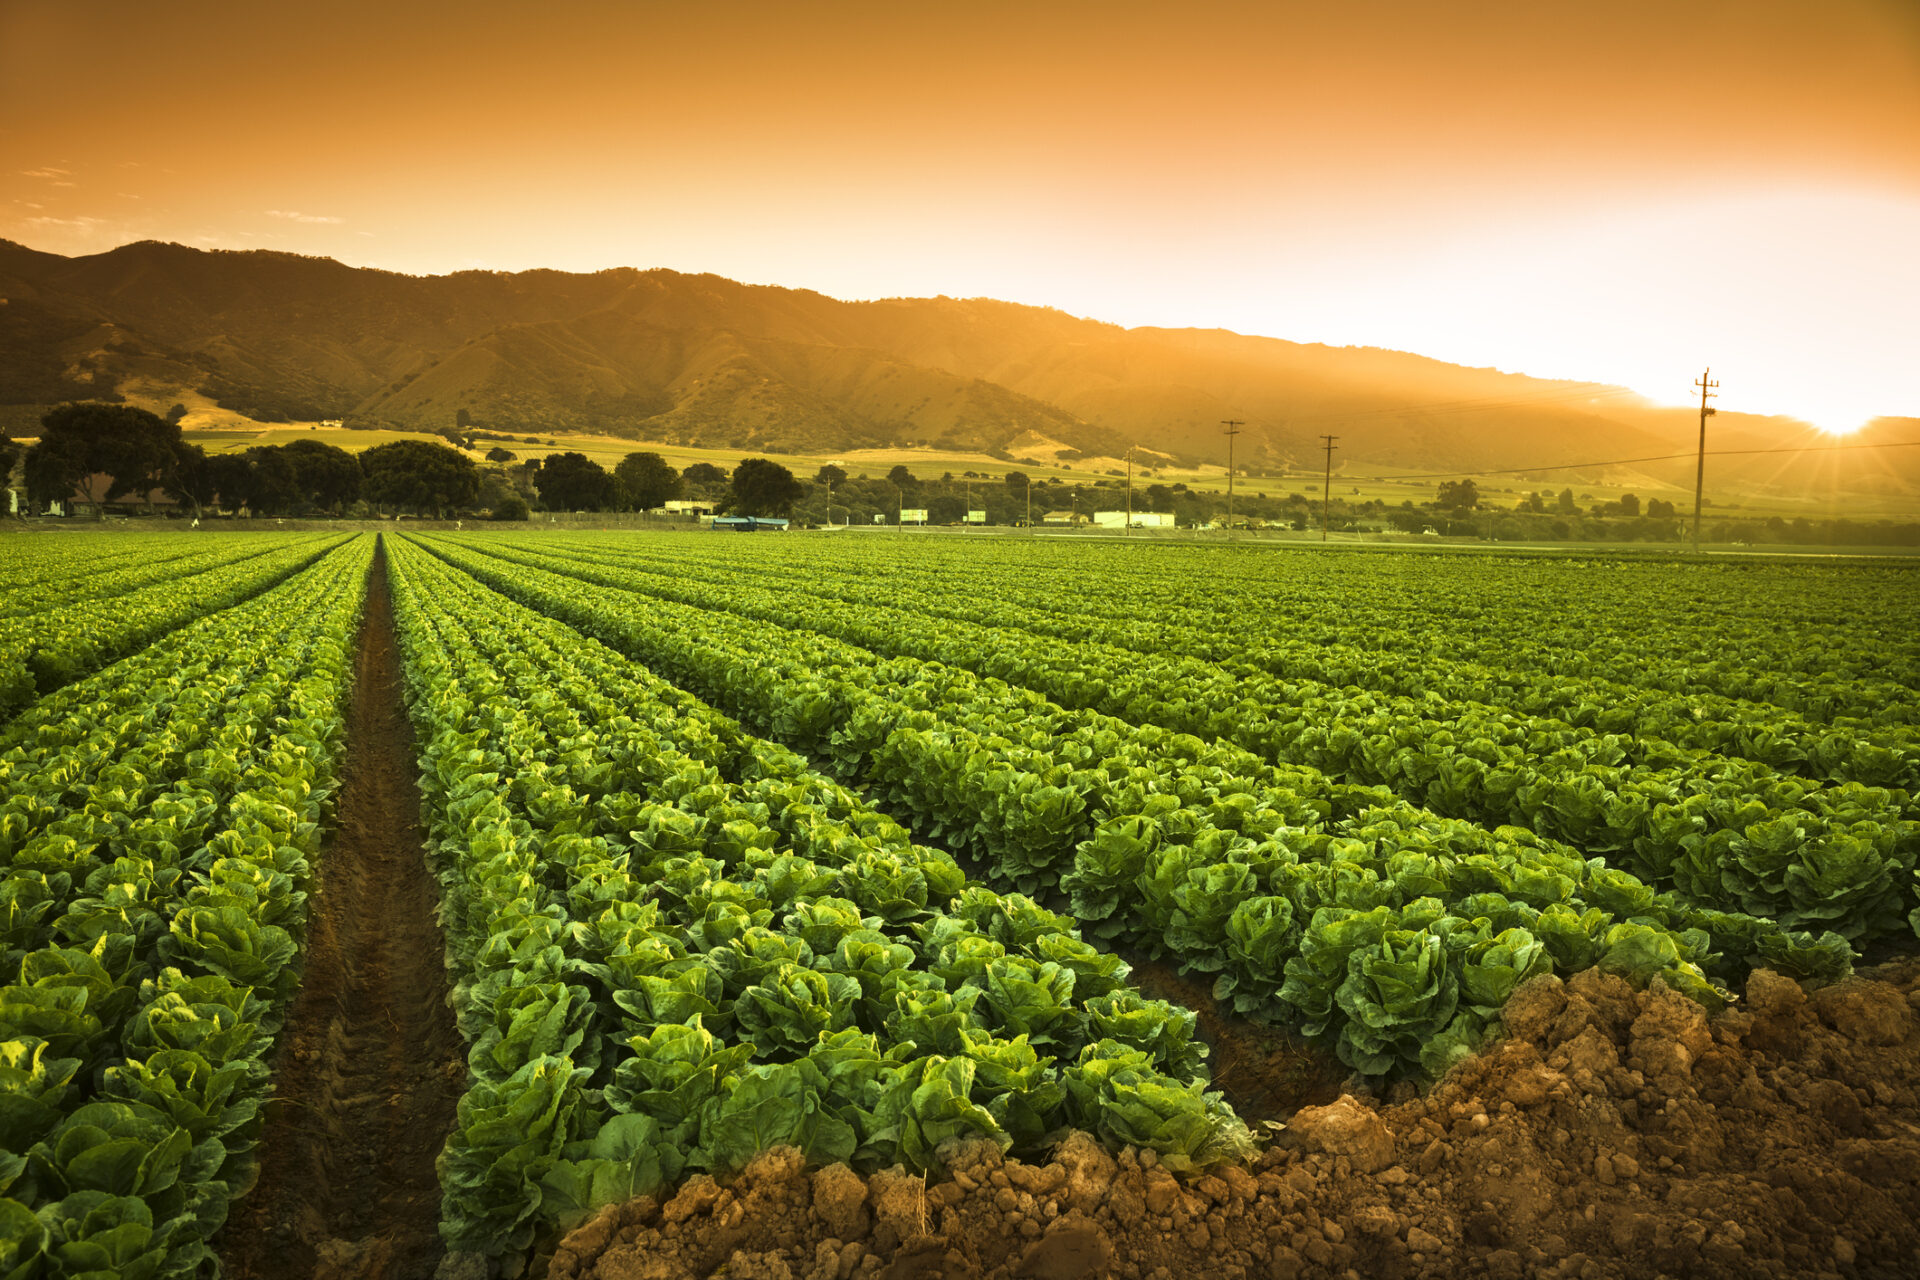 Sustainable Agriculture: The Benefits of Organic Farming Practices